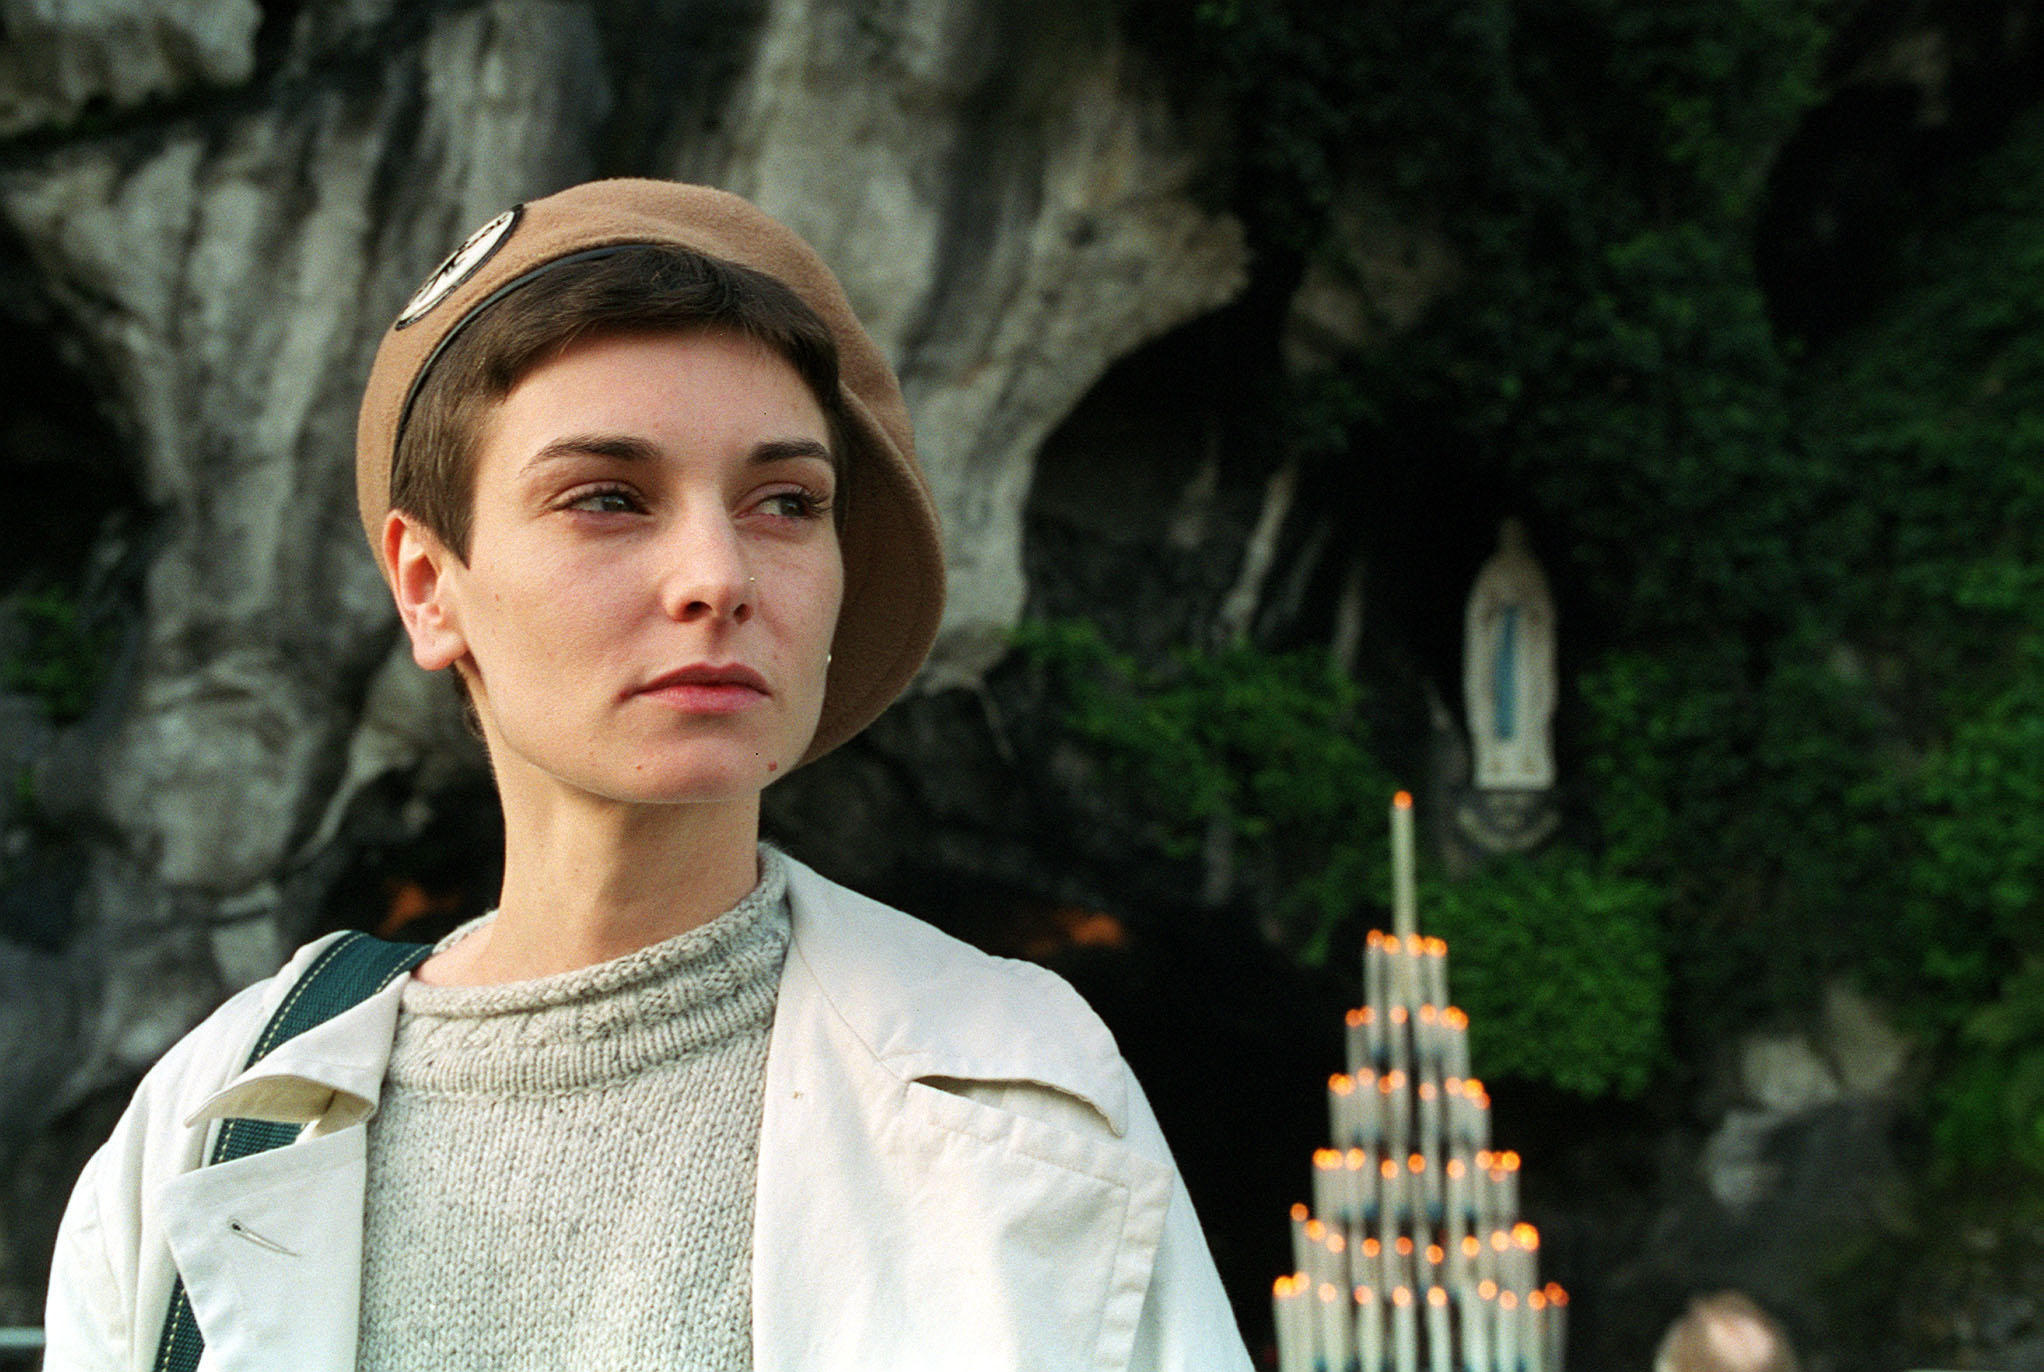 Sinéad O'Connor at Lourdes in France in 1999, where she was ordained as a priest in the Latin Tridentine Church and adopted the name Mother Bernadette Mary O'Connor.